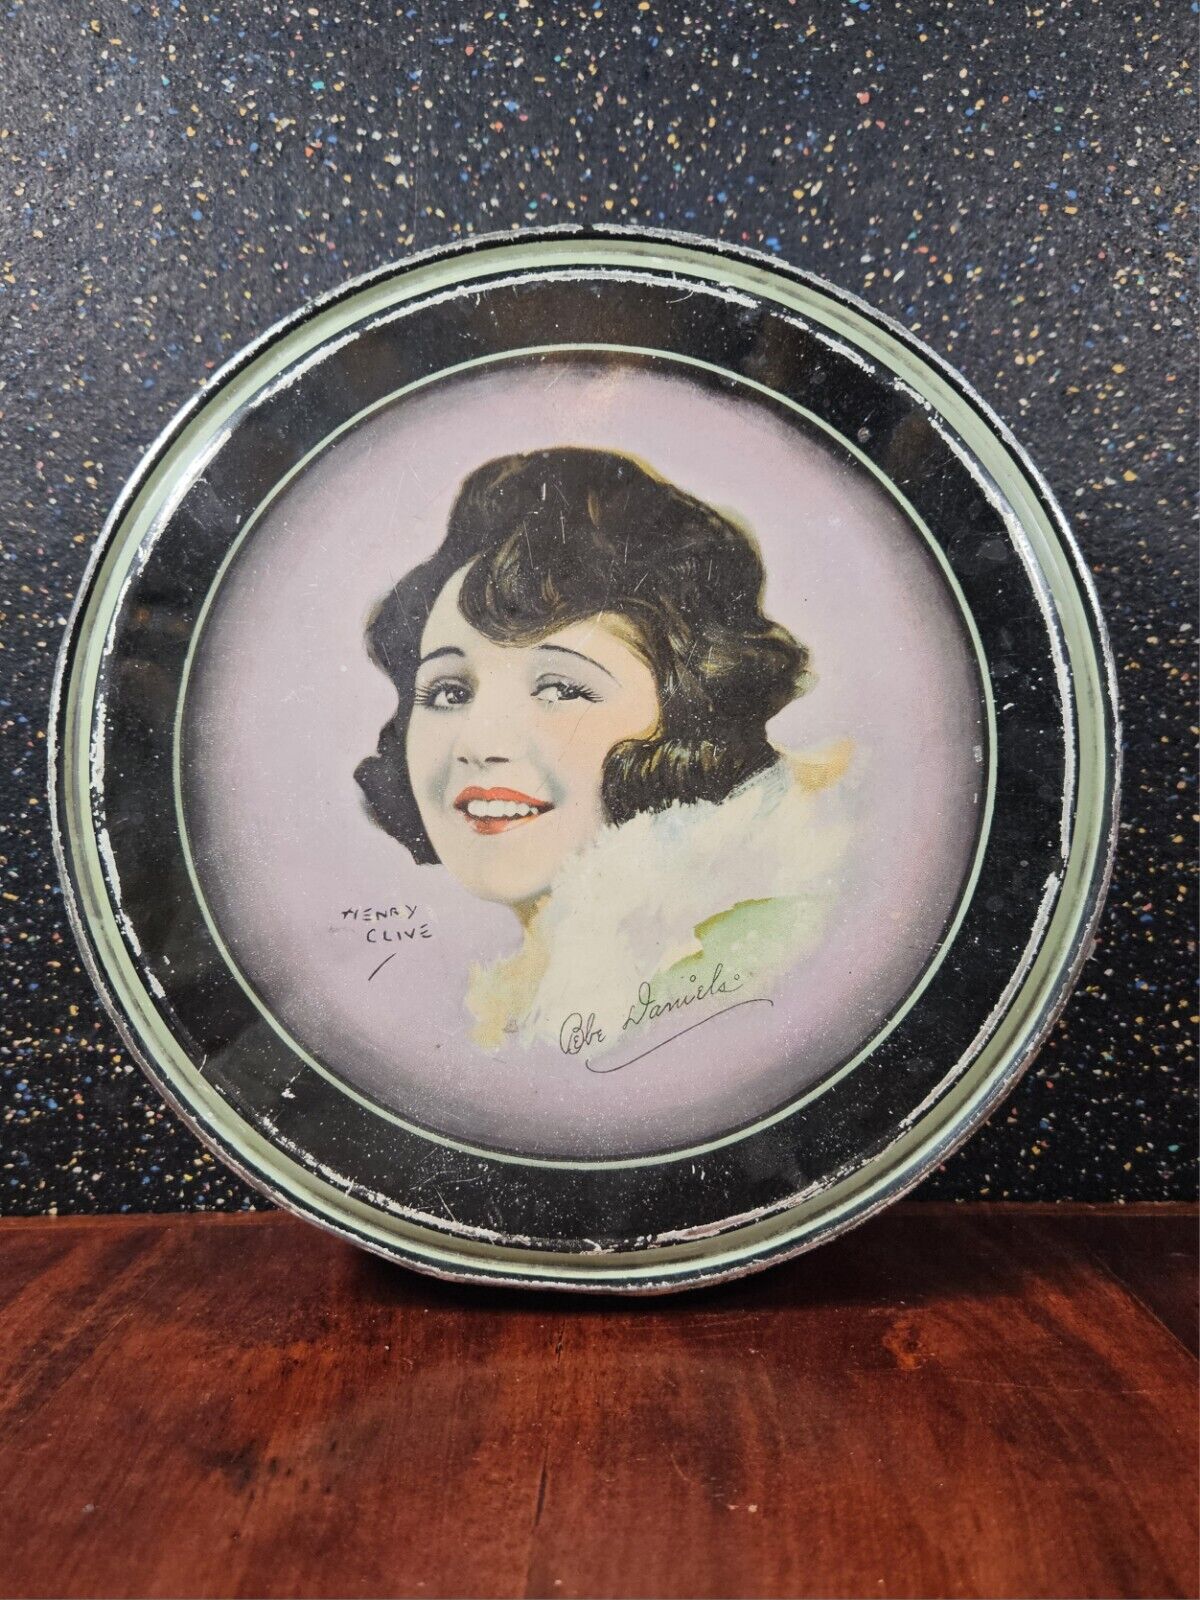 Vintage 1920s Canco Beautebox Tin Henry Clive Bebe Daniels Silent Movie Star Box